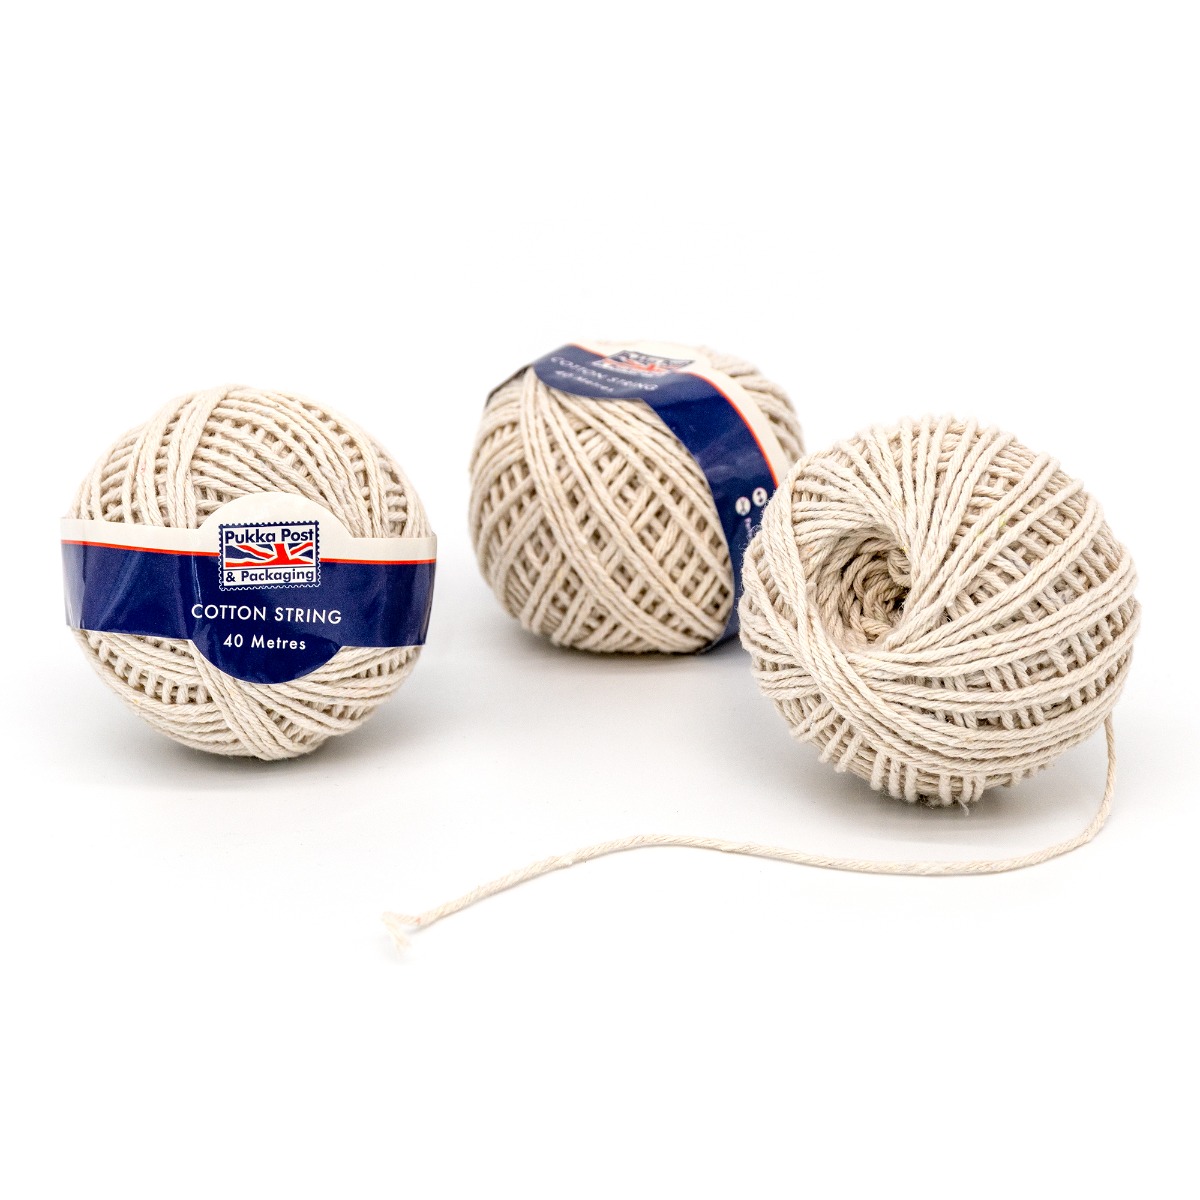 100% cotton String Ball in 40m length - Pack of 4 - Pukka Post & Packaging